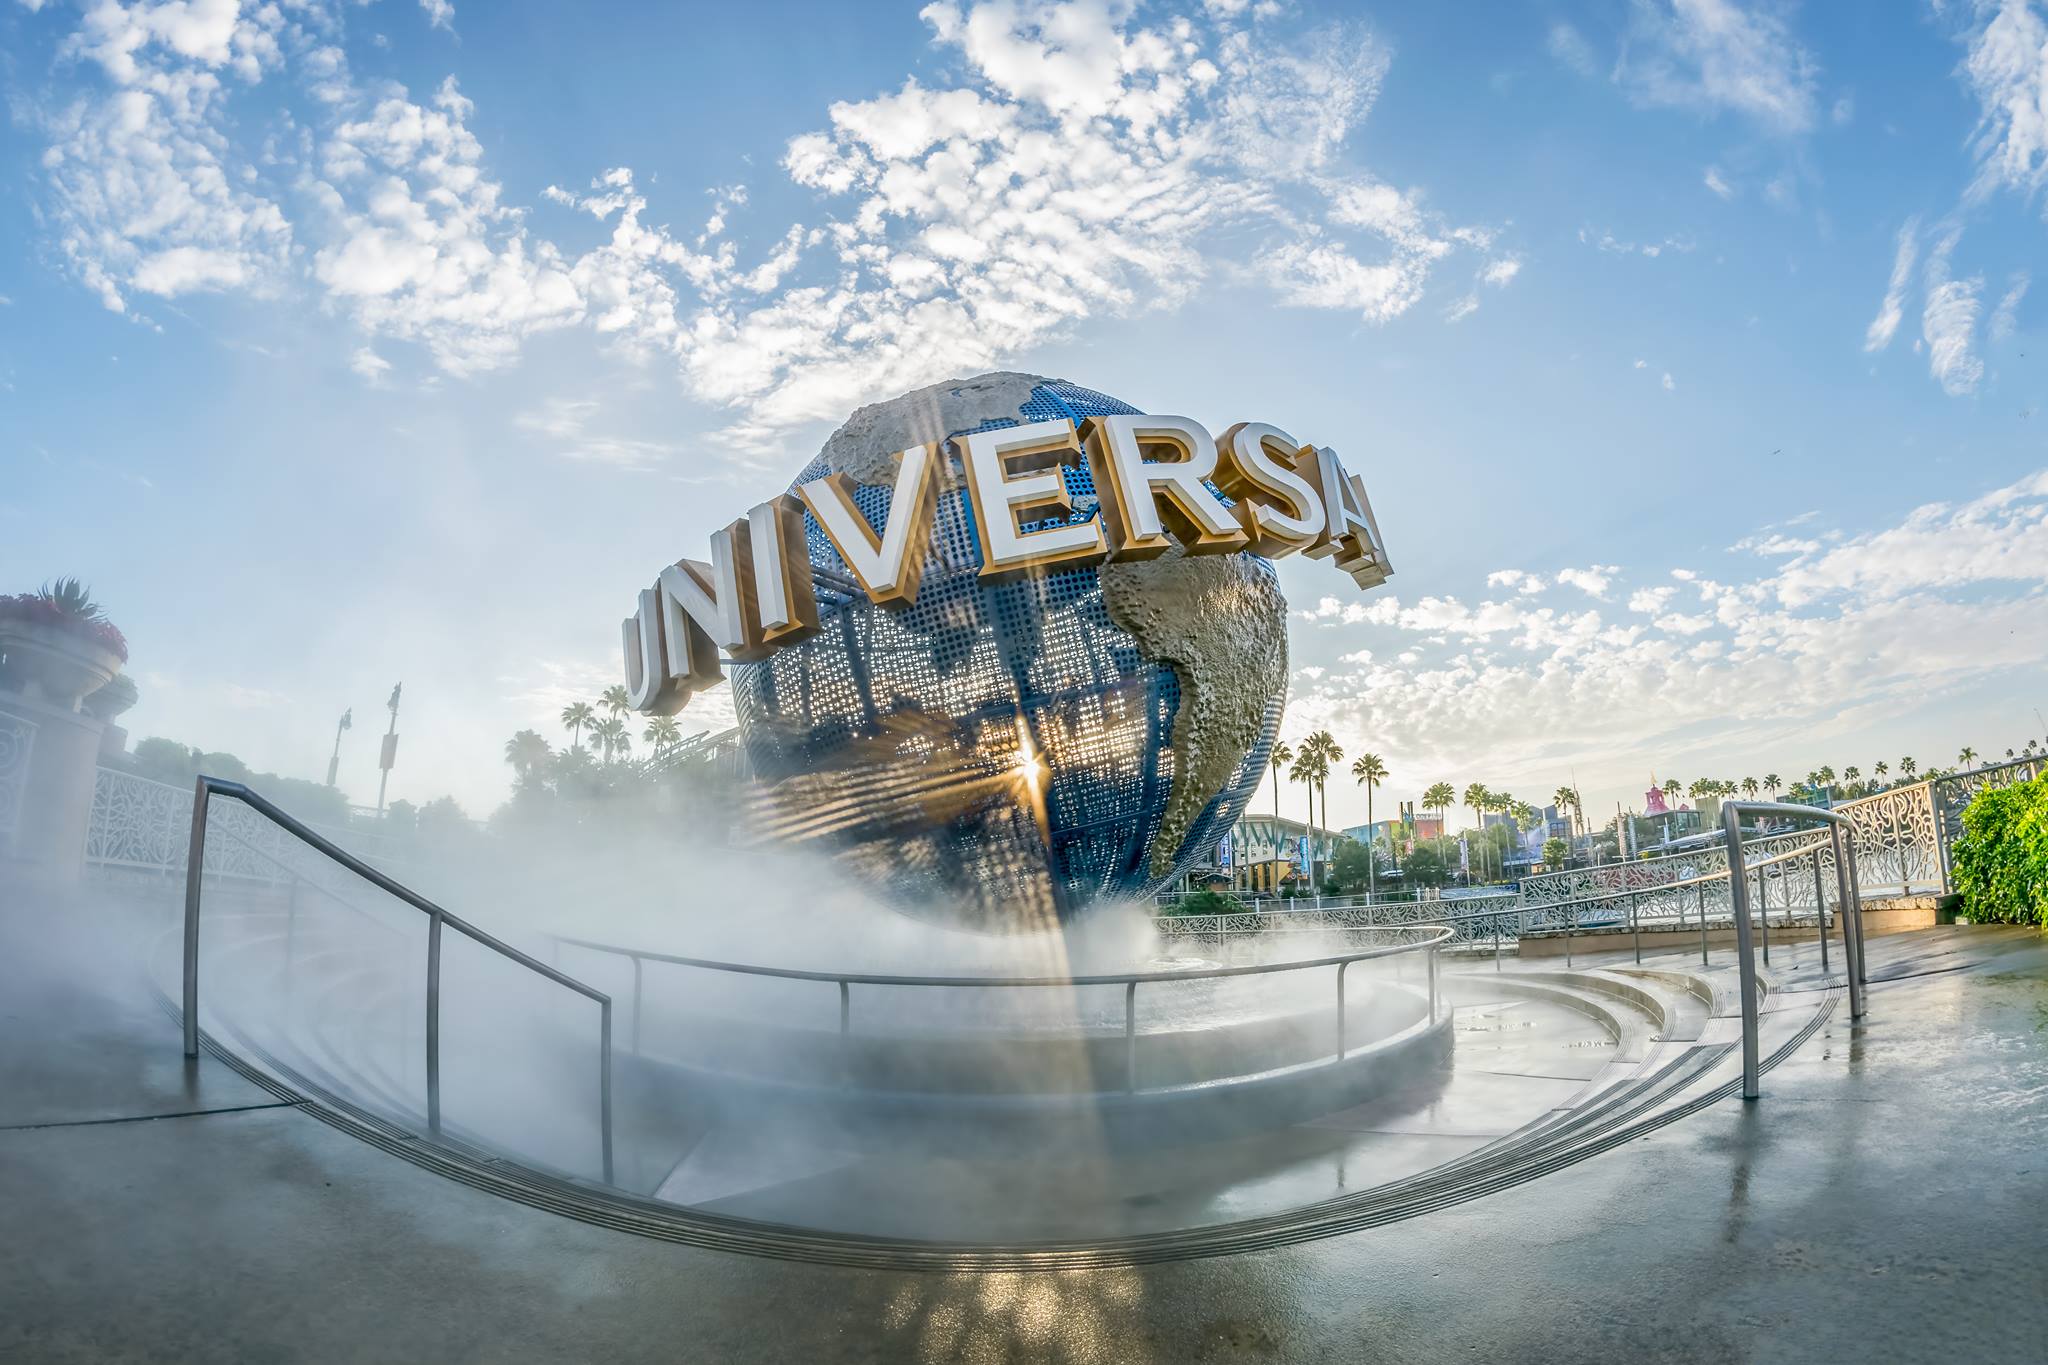 Universal Orlando Resort: Save with rates from $99 per night